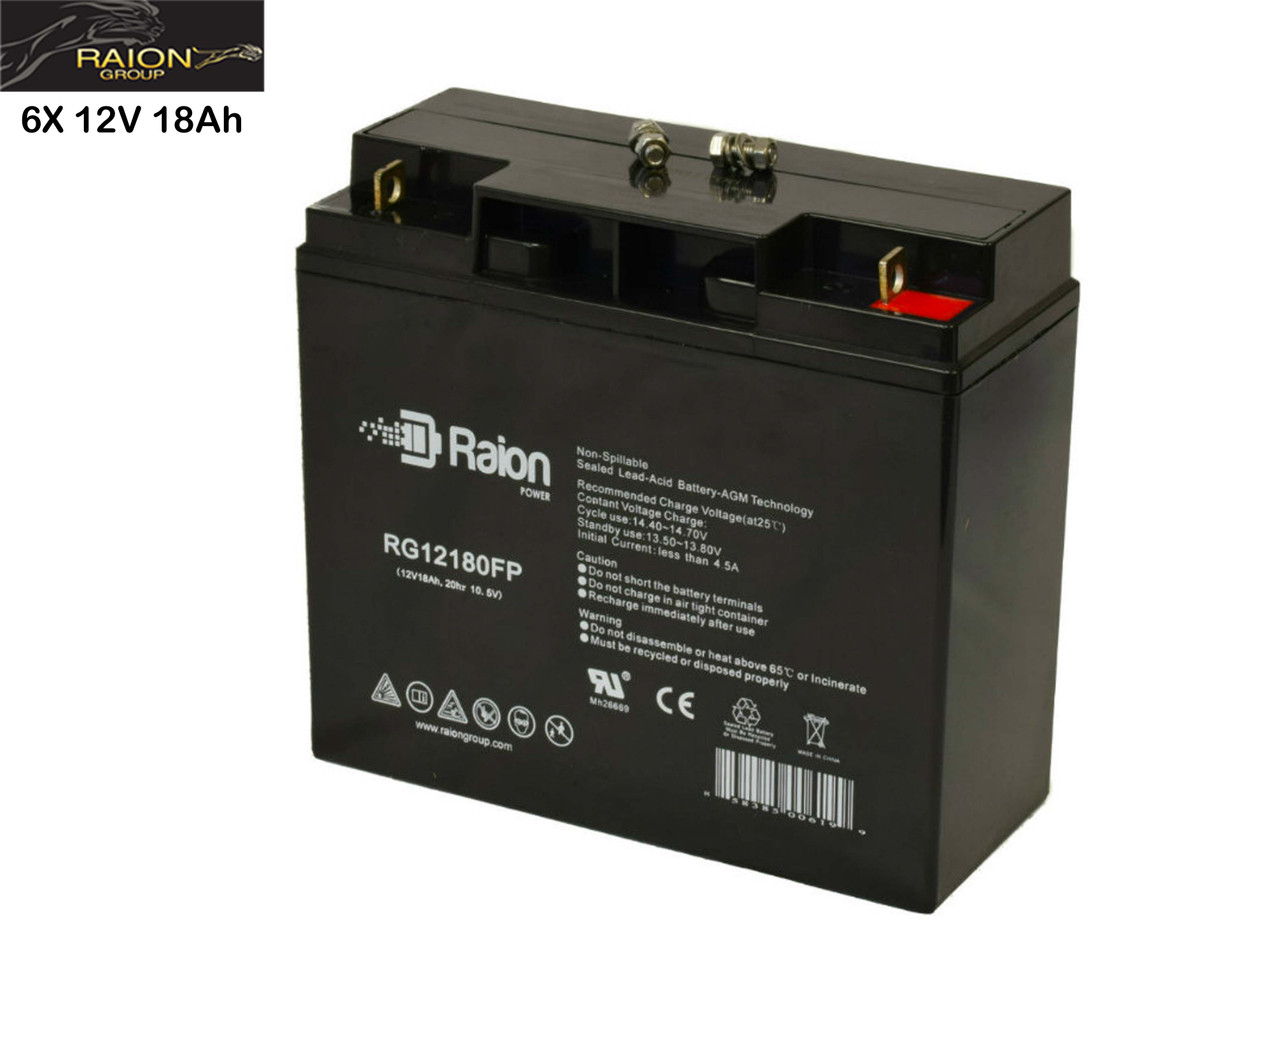 Raion Power Replacement 12V 18Ah Battery for Luyuan MN5-CAS7220-Z5A - 6 Pack